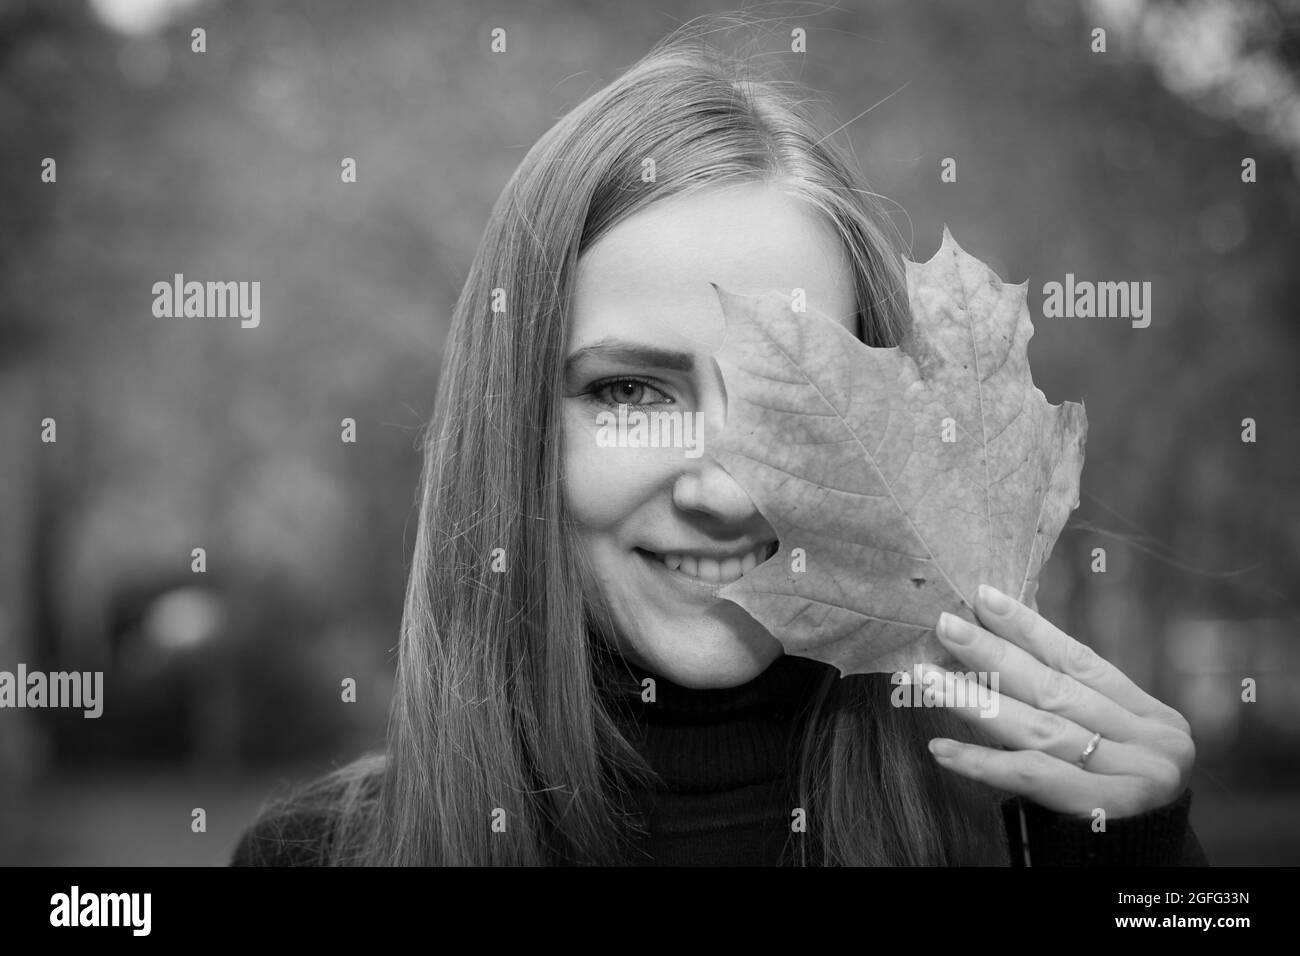 Beautiful young woman on a background of autumn trees. Emotion concept. The girl holds a maple leaf in her hand and covers one eye with the leaf. Stock Photo